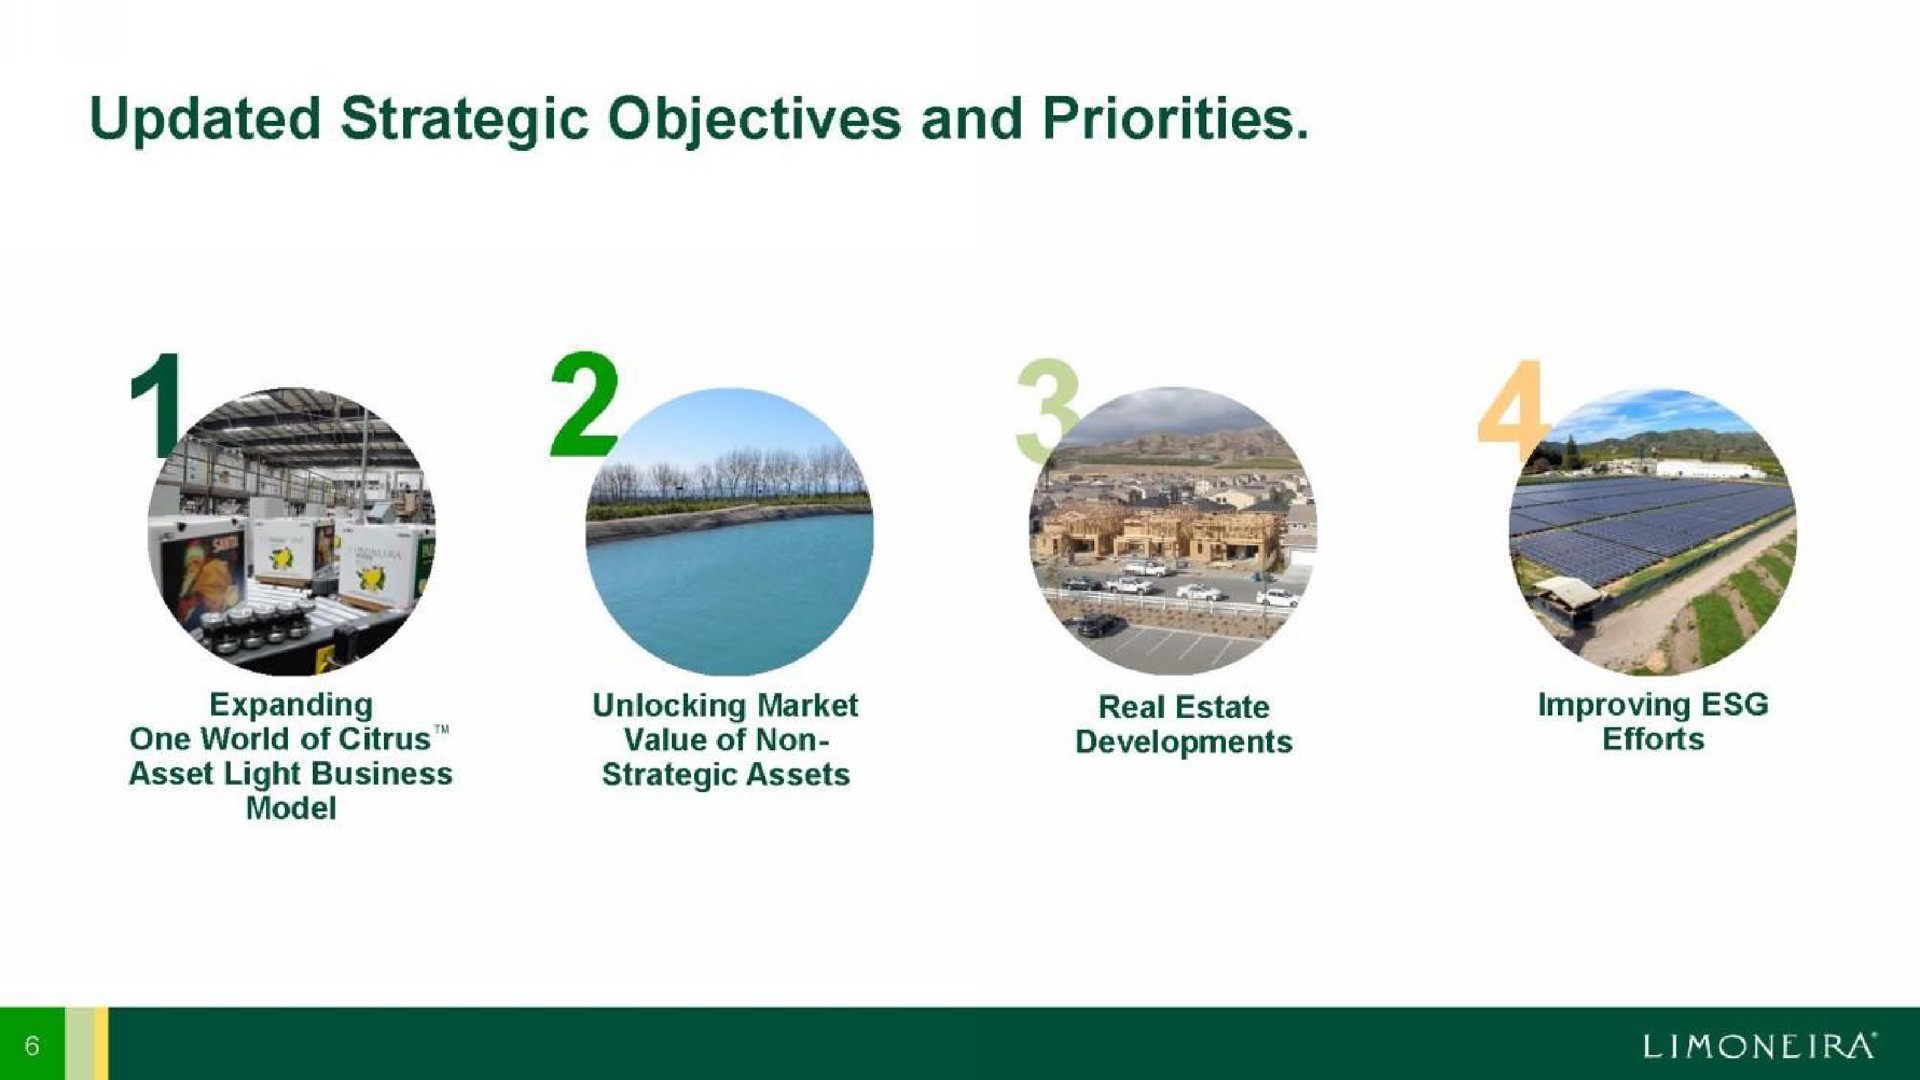 updated strategic objectives and priorities | Limoneira